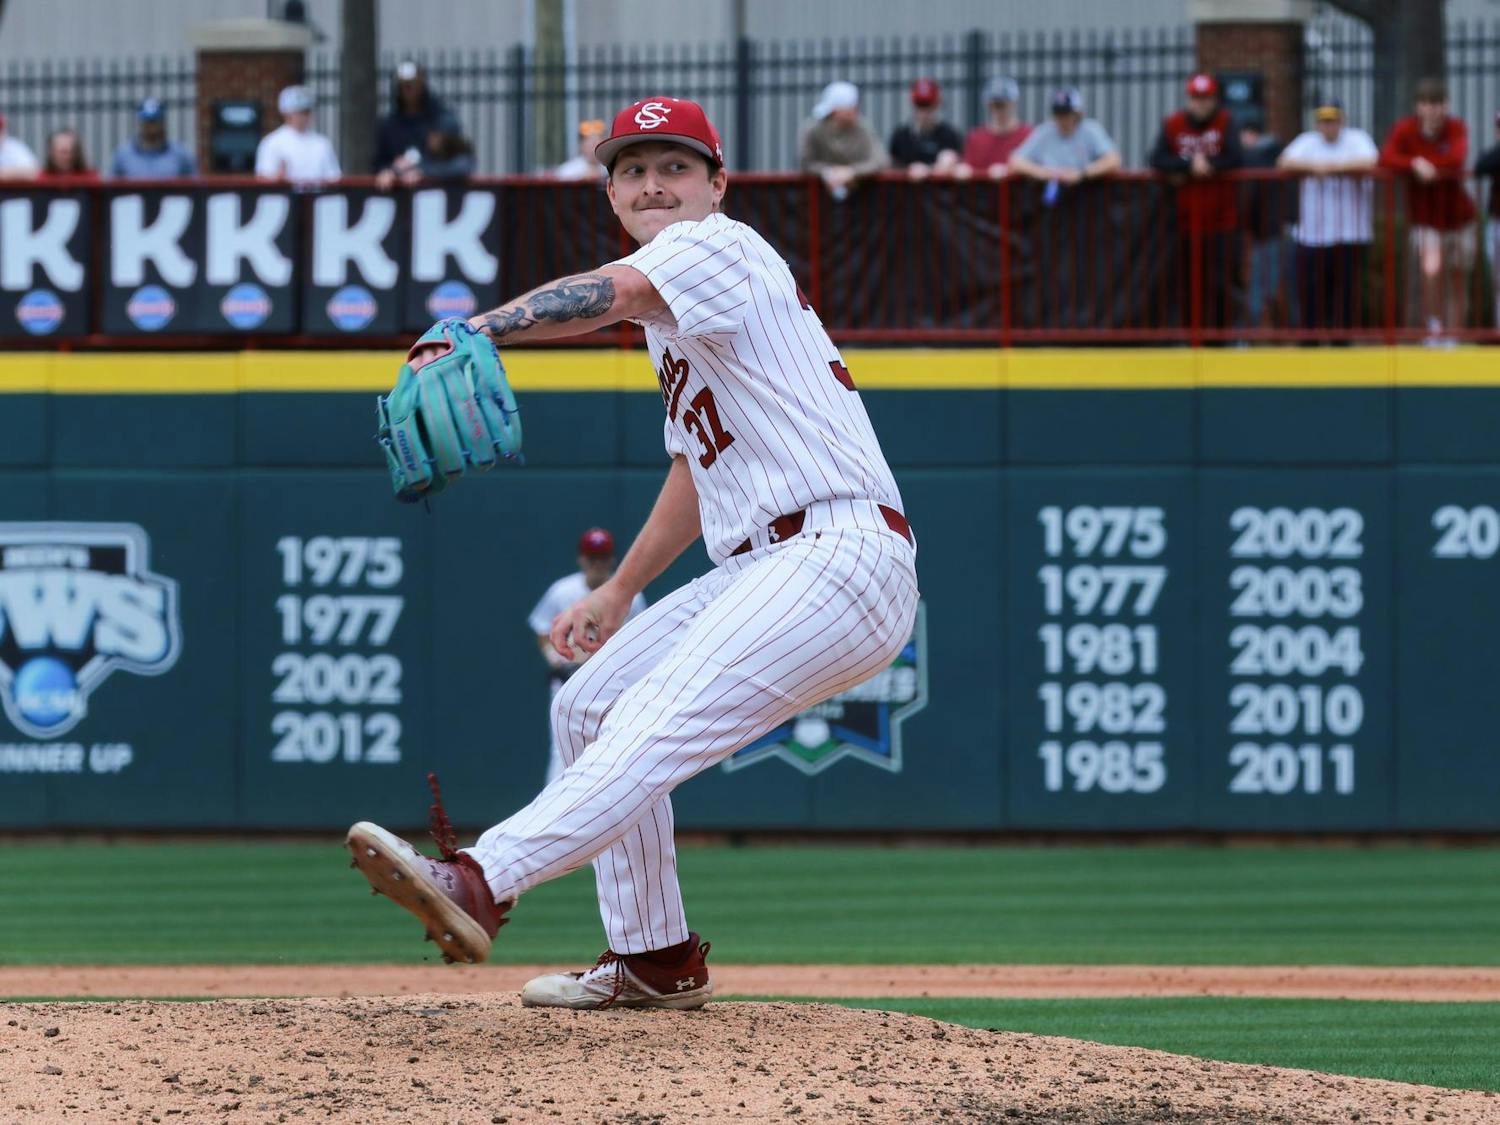 Junior pitcher Chris Veach winds up a pitch during South Carolina's victory over Vanderbilt on March 23, 2024. Veach has a 3.86 earnd run average so far in the 2024 season.